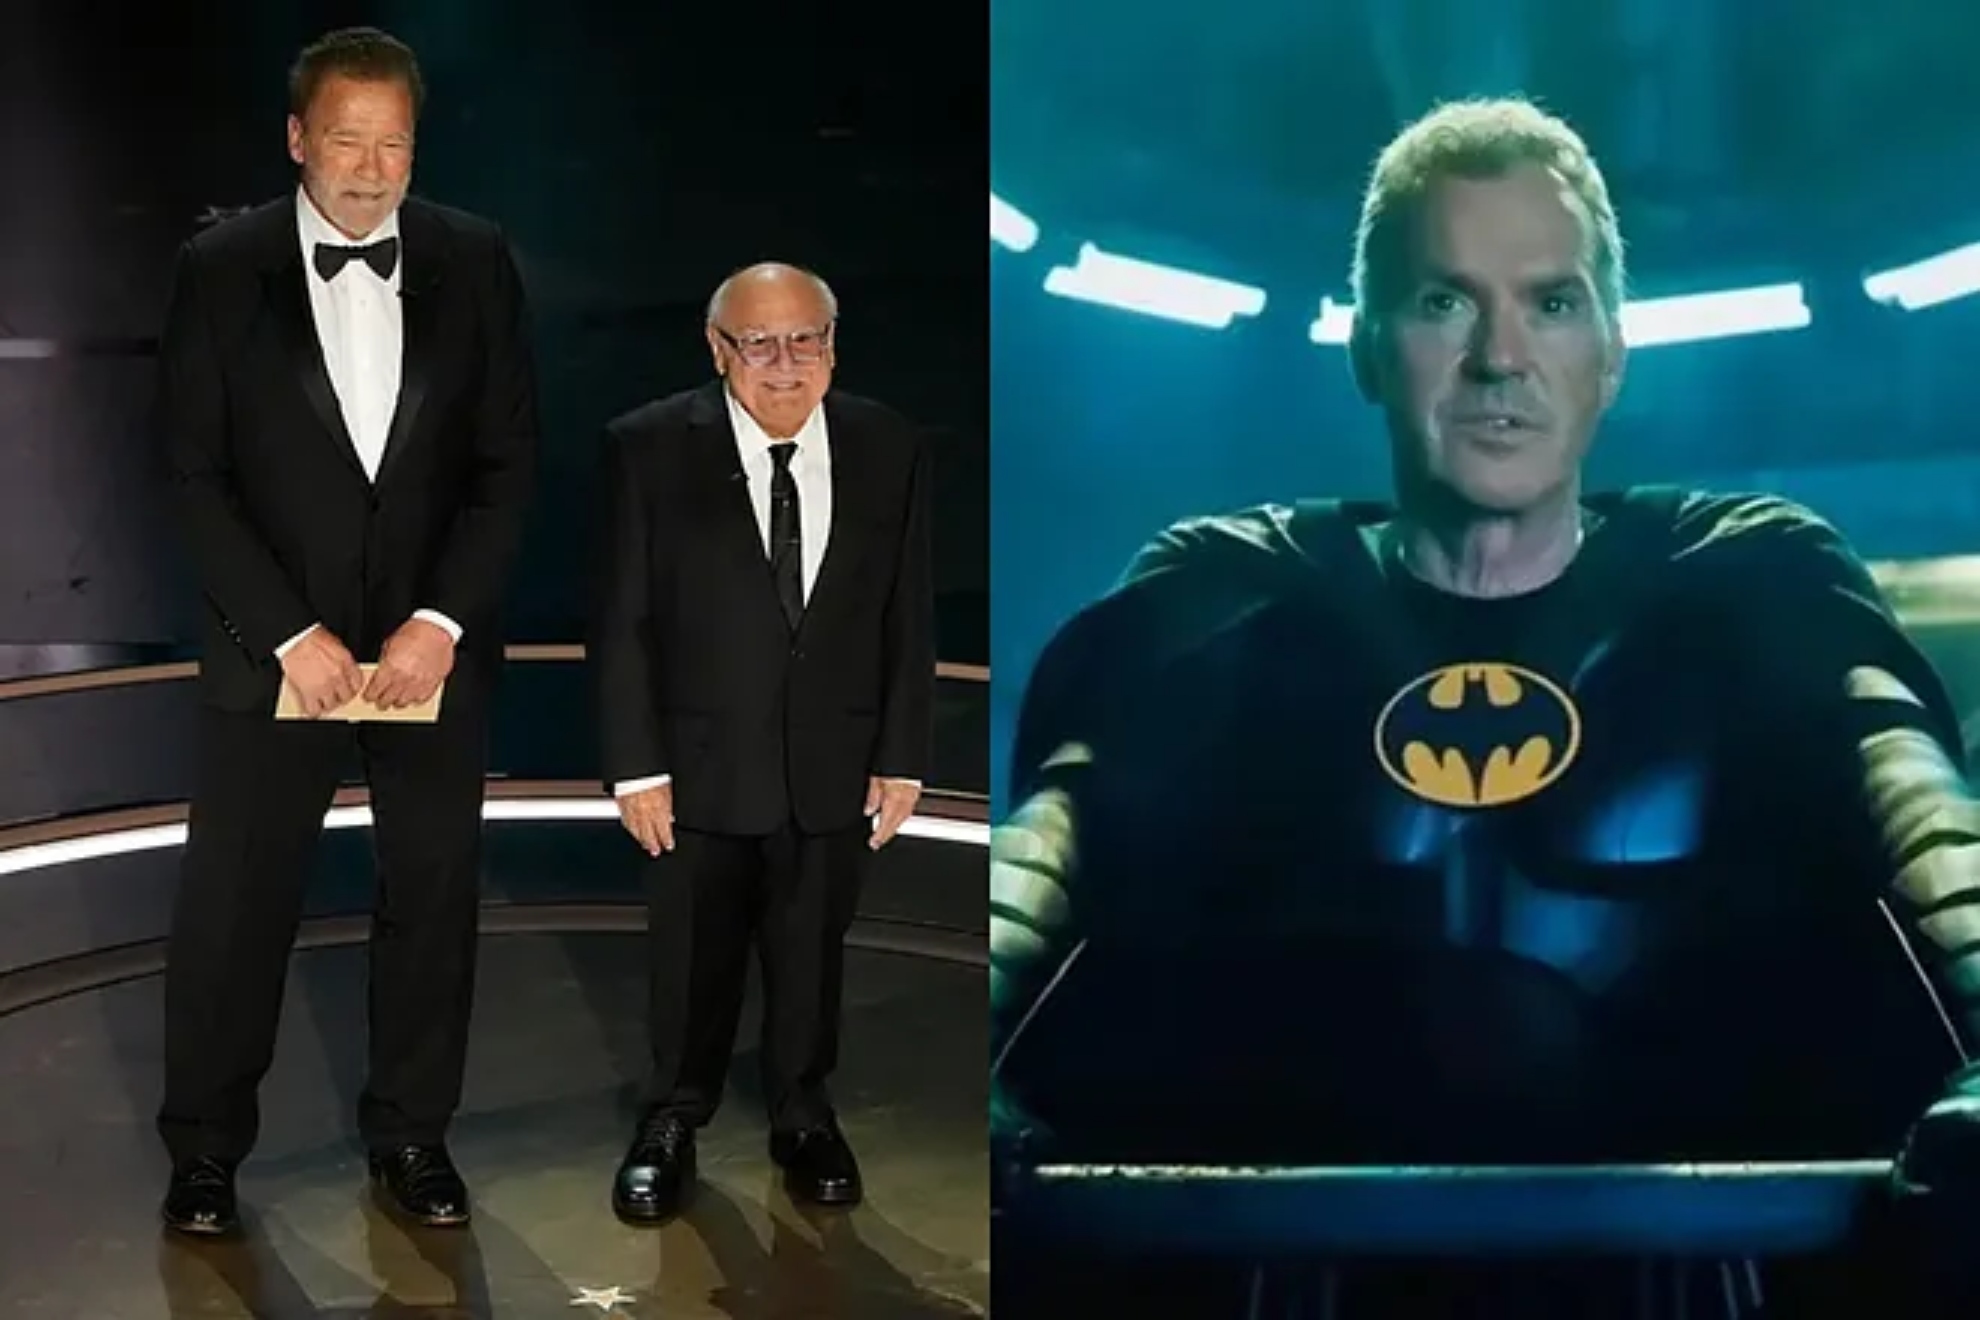 Arnold Schwarzenegger and Danny DeVitto team up to troll Michael Keatons Batman during the Oscars